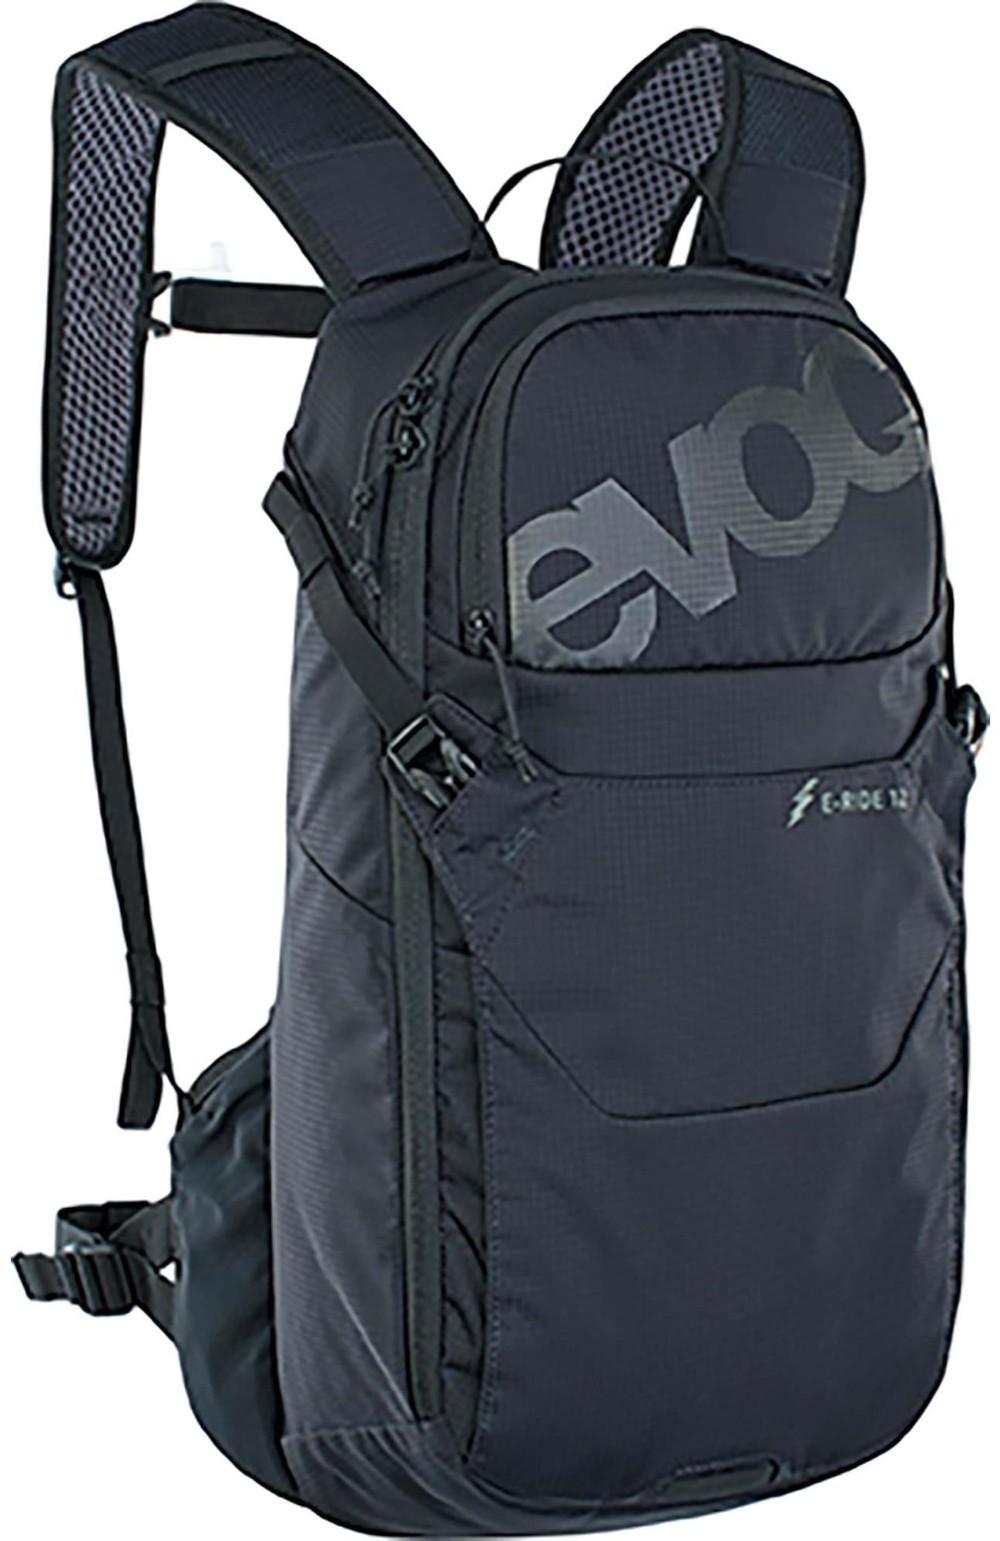 E-Ride 12L Performance Backpack image 0